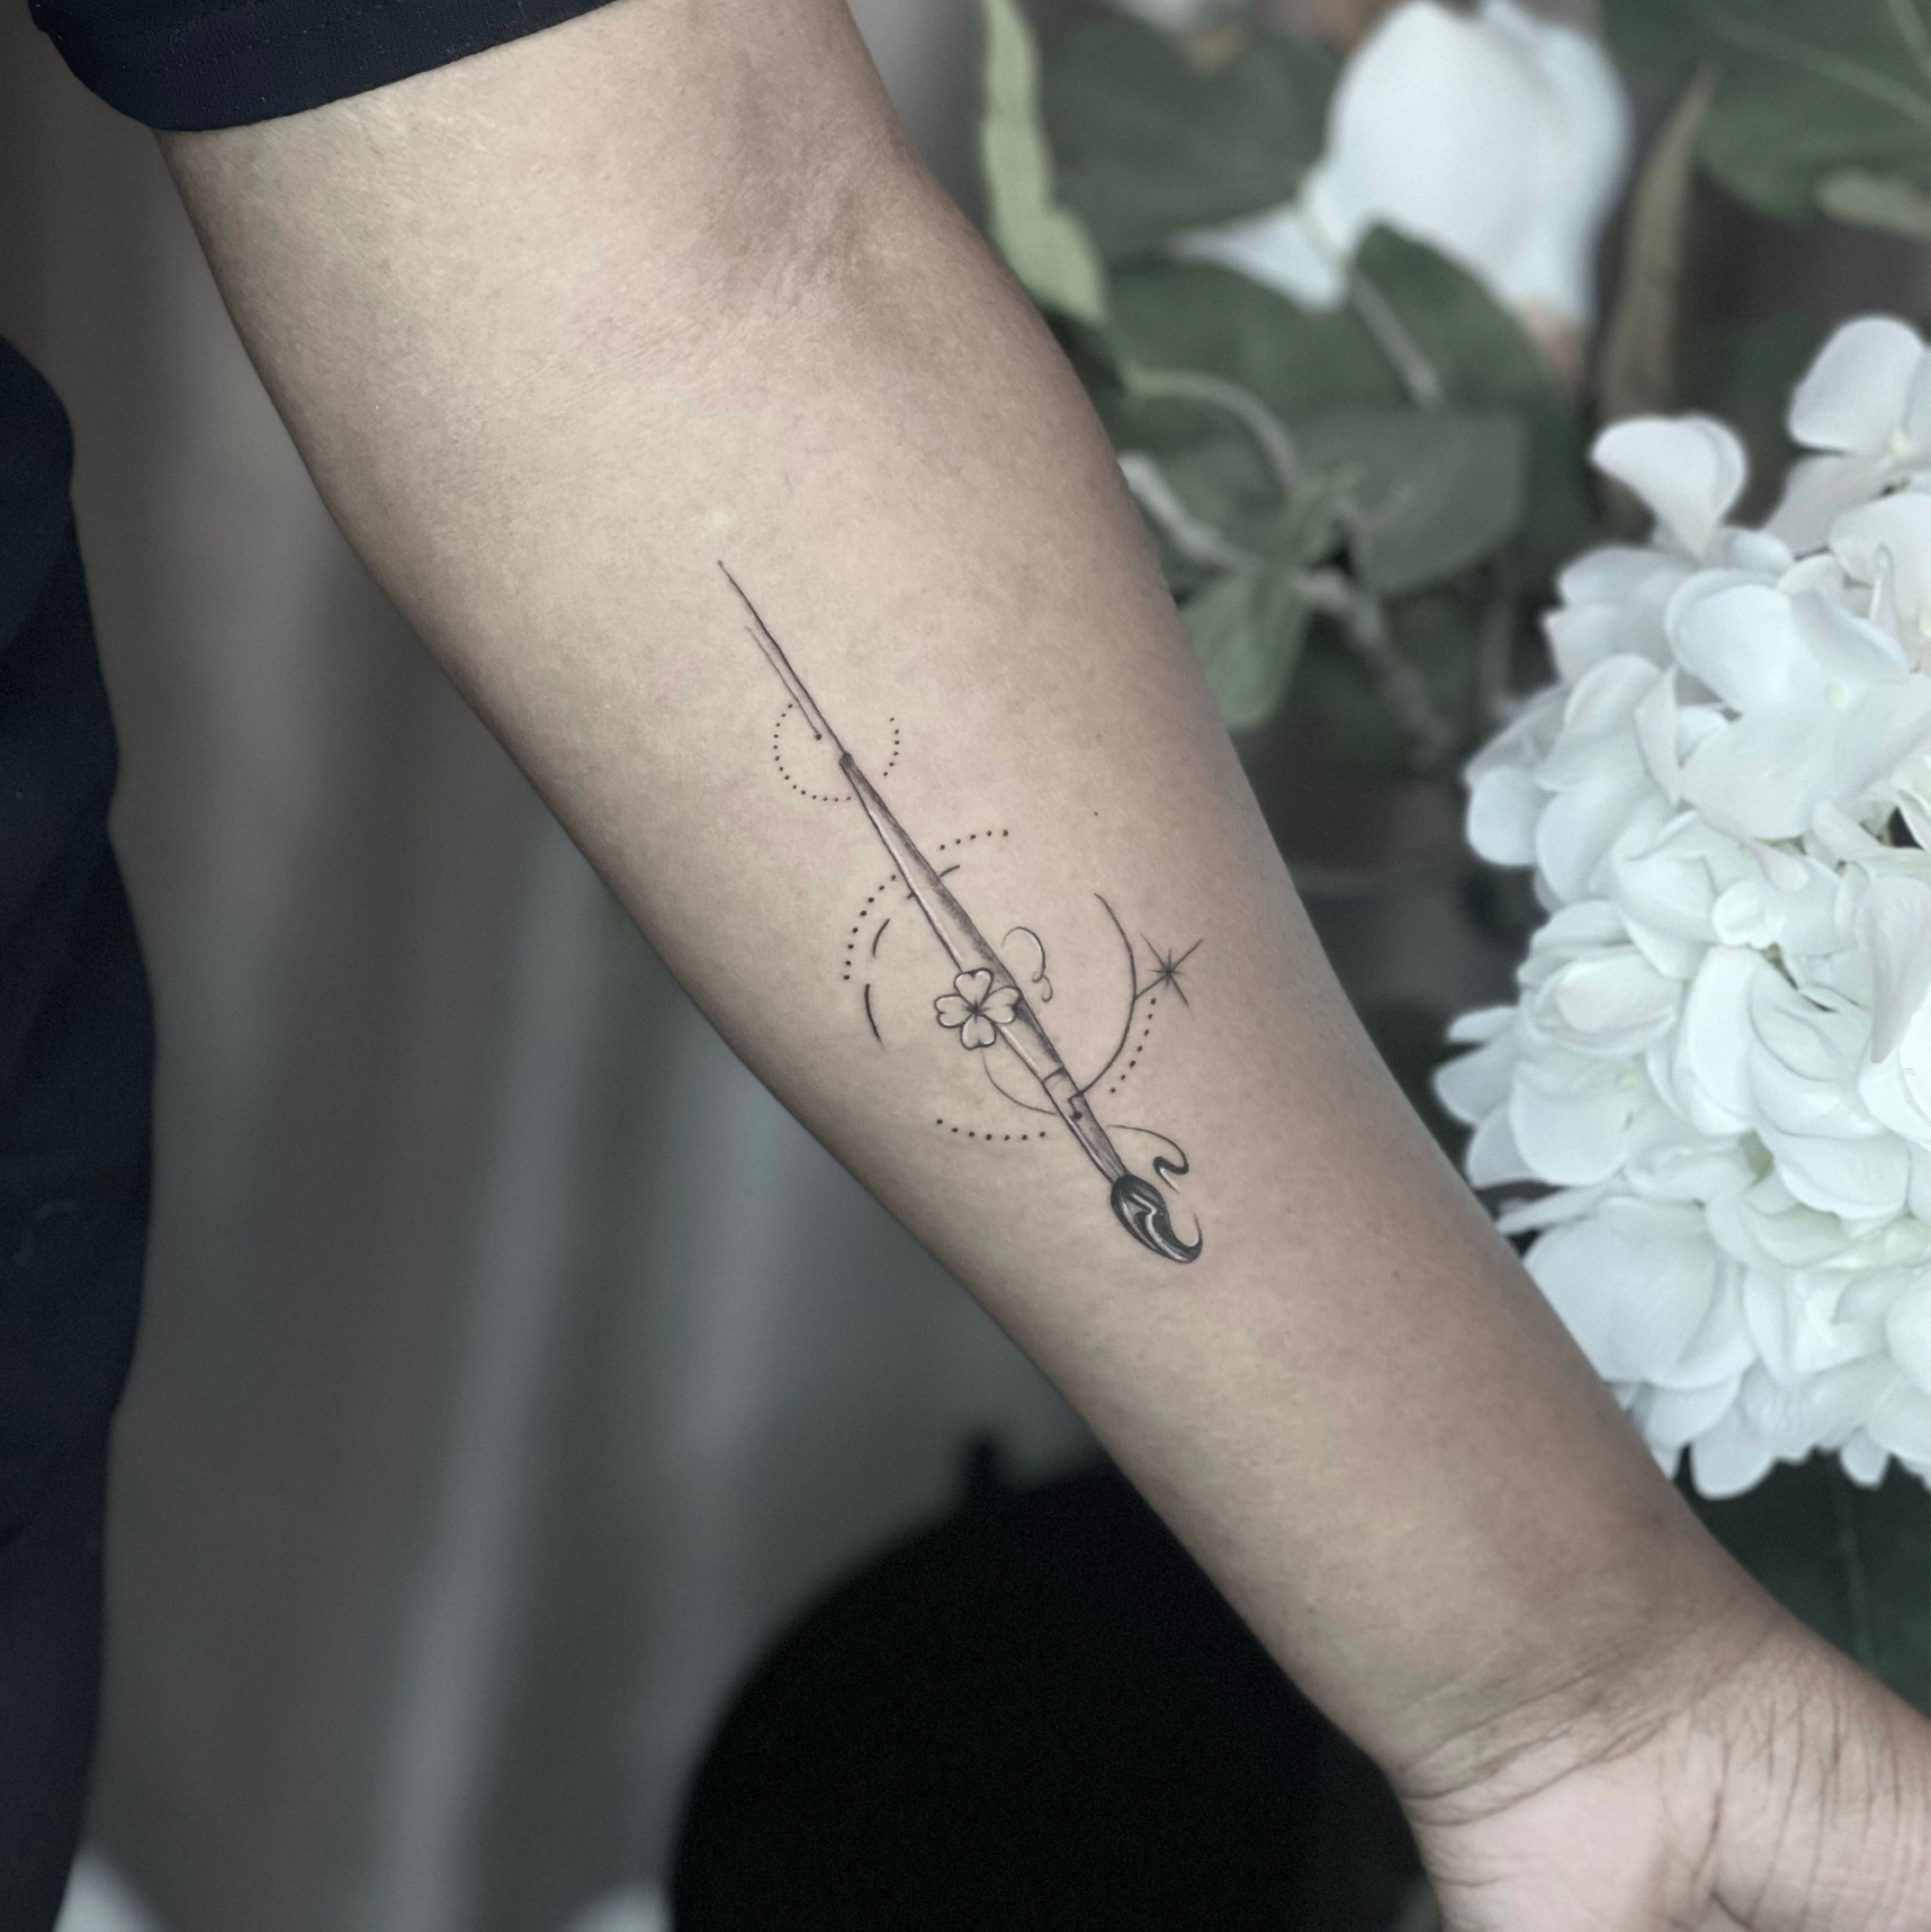 Tattoo tagged with small line art masa tiny women ankle ifttt  little paintbrush other illustrative fine line  inkedappcom